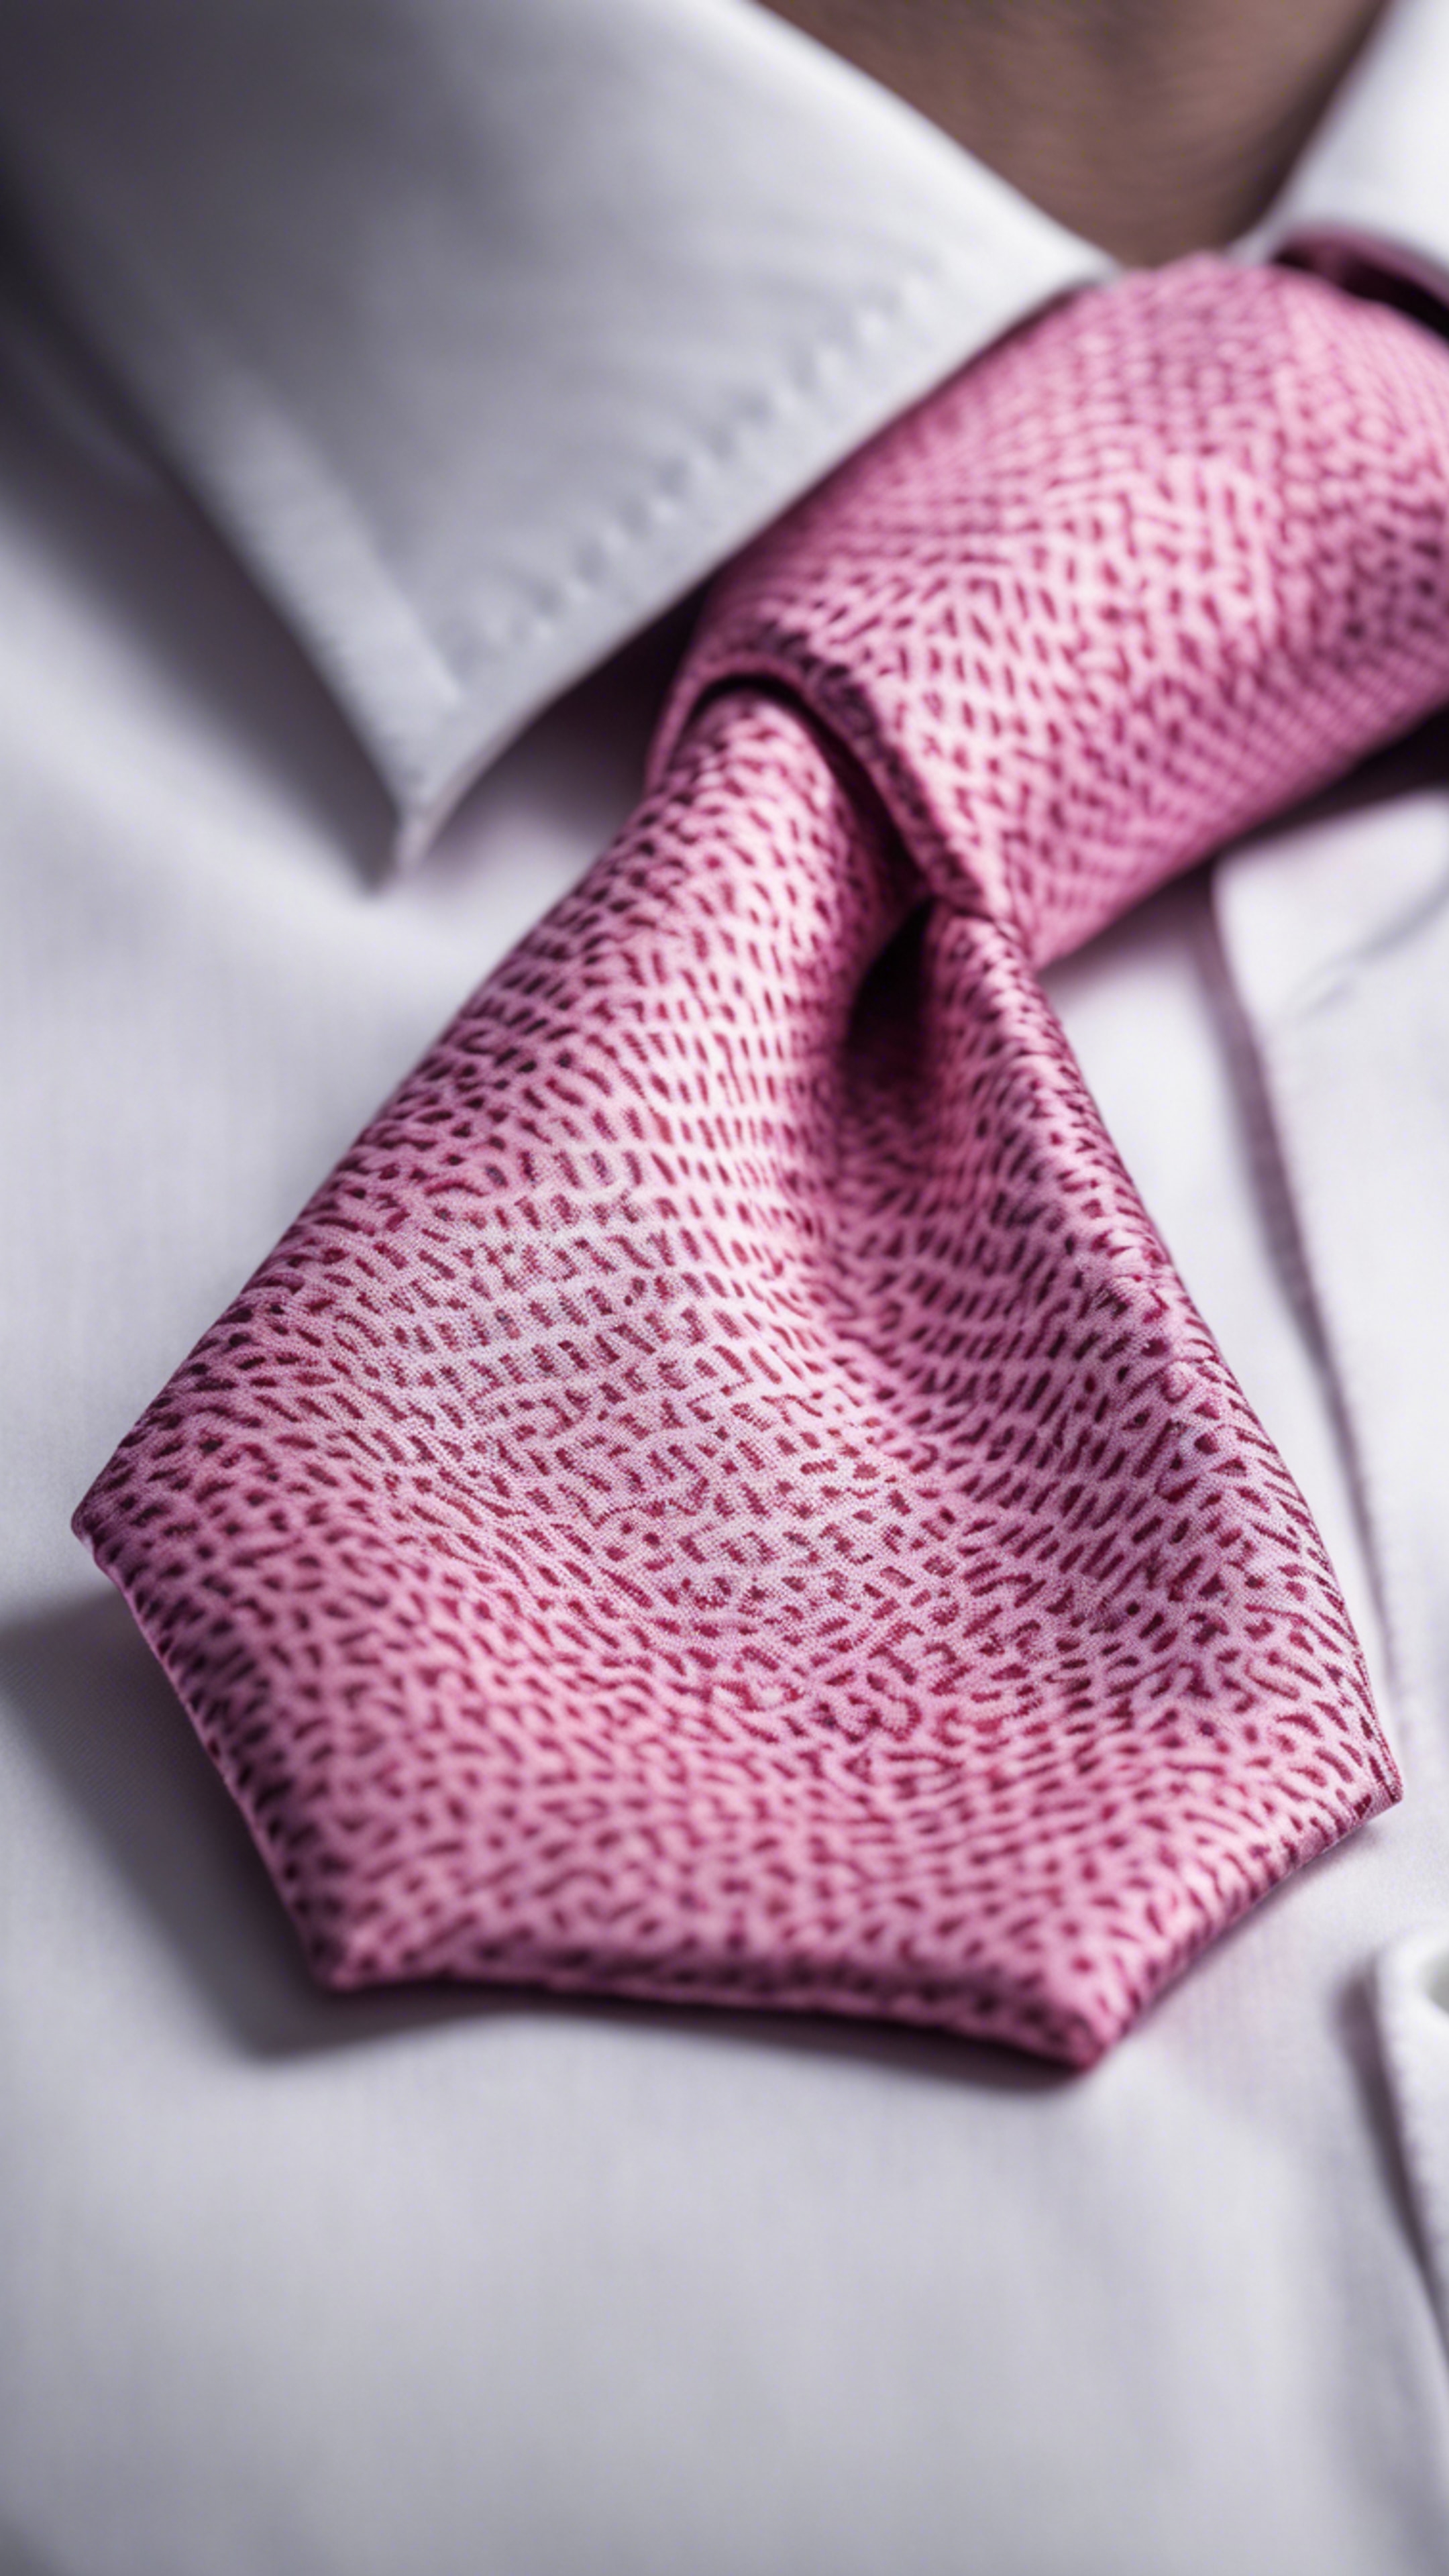 A pink patterned silk tie atop a clean, starched white shirt, representing preppy fashion. Behang[46ce982d17ca4b87a426]